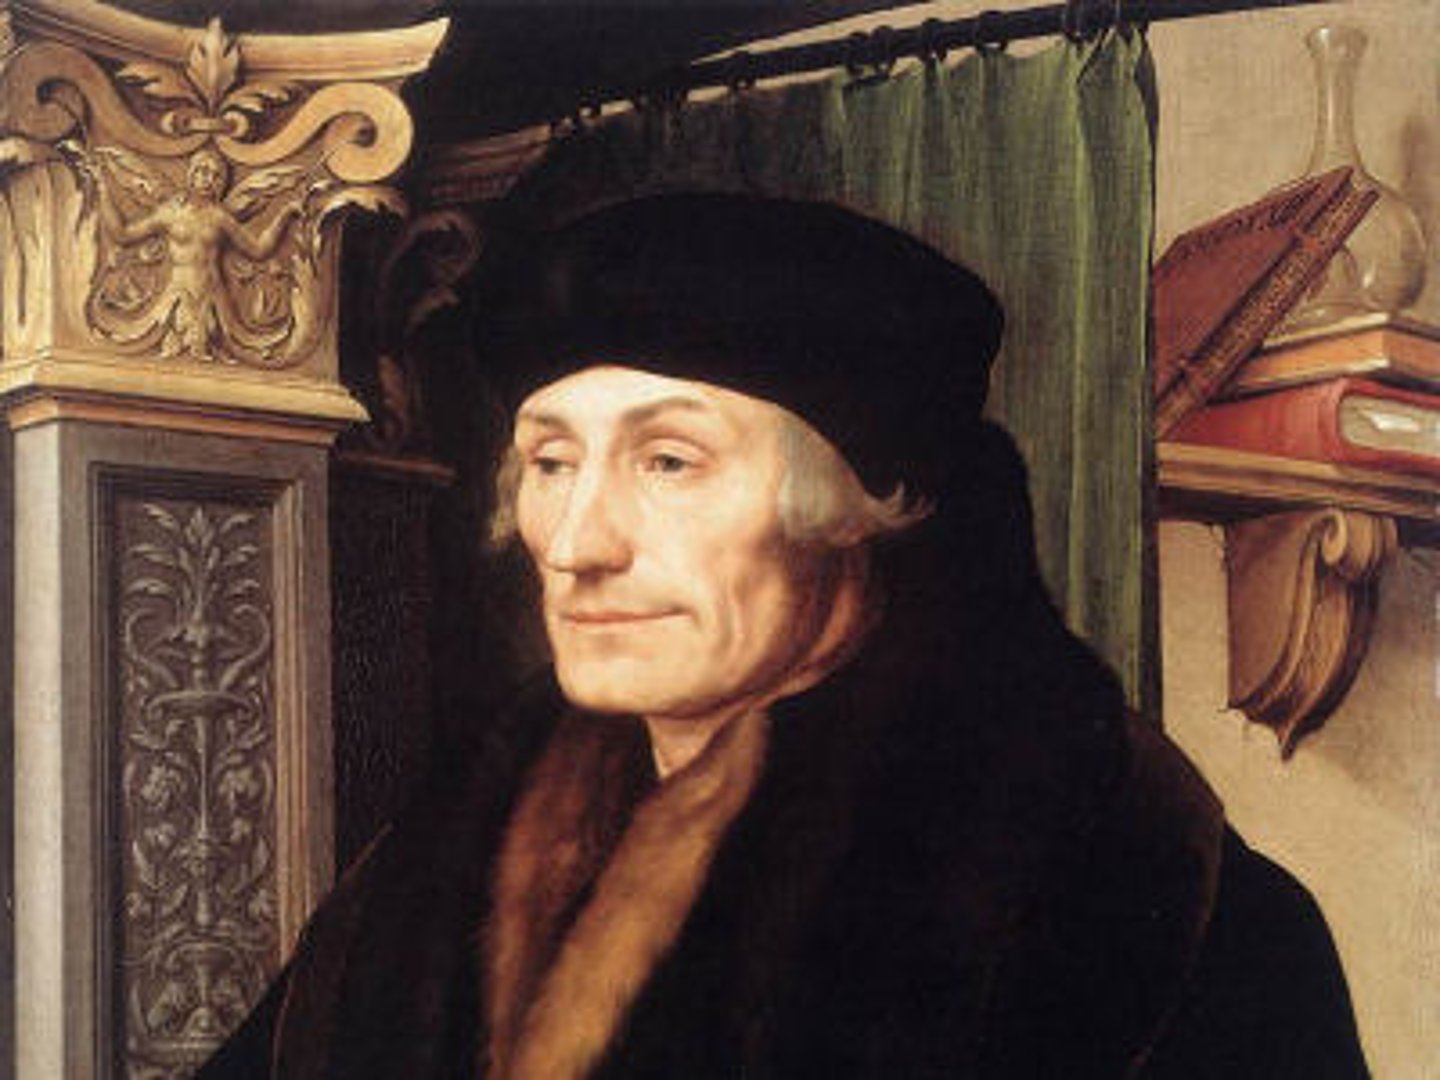 <p>1. Northern humanist who wrote "In Praise of Folly"<br>2. Wrote in Latin while most humanists wrote in the vernacular<br>3. Wanted to reform the Catholic Church, not destroy it</p>